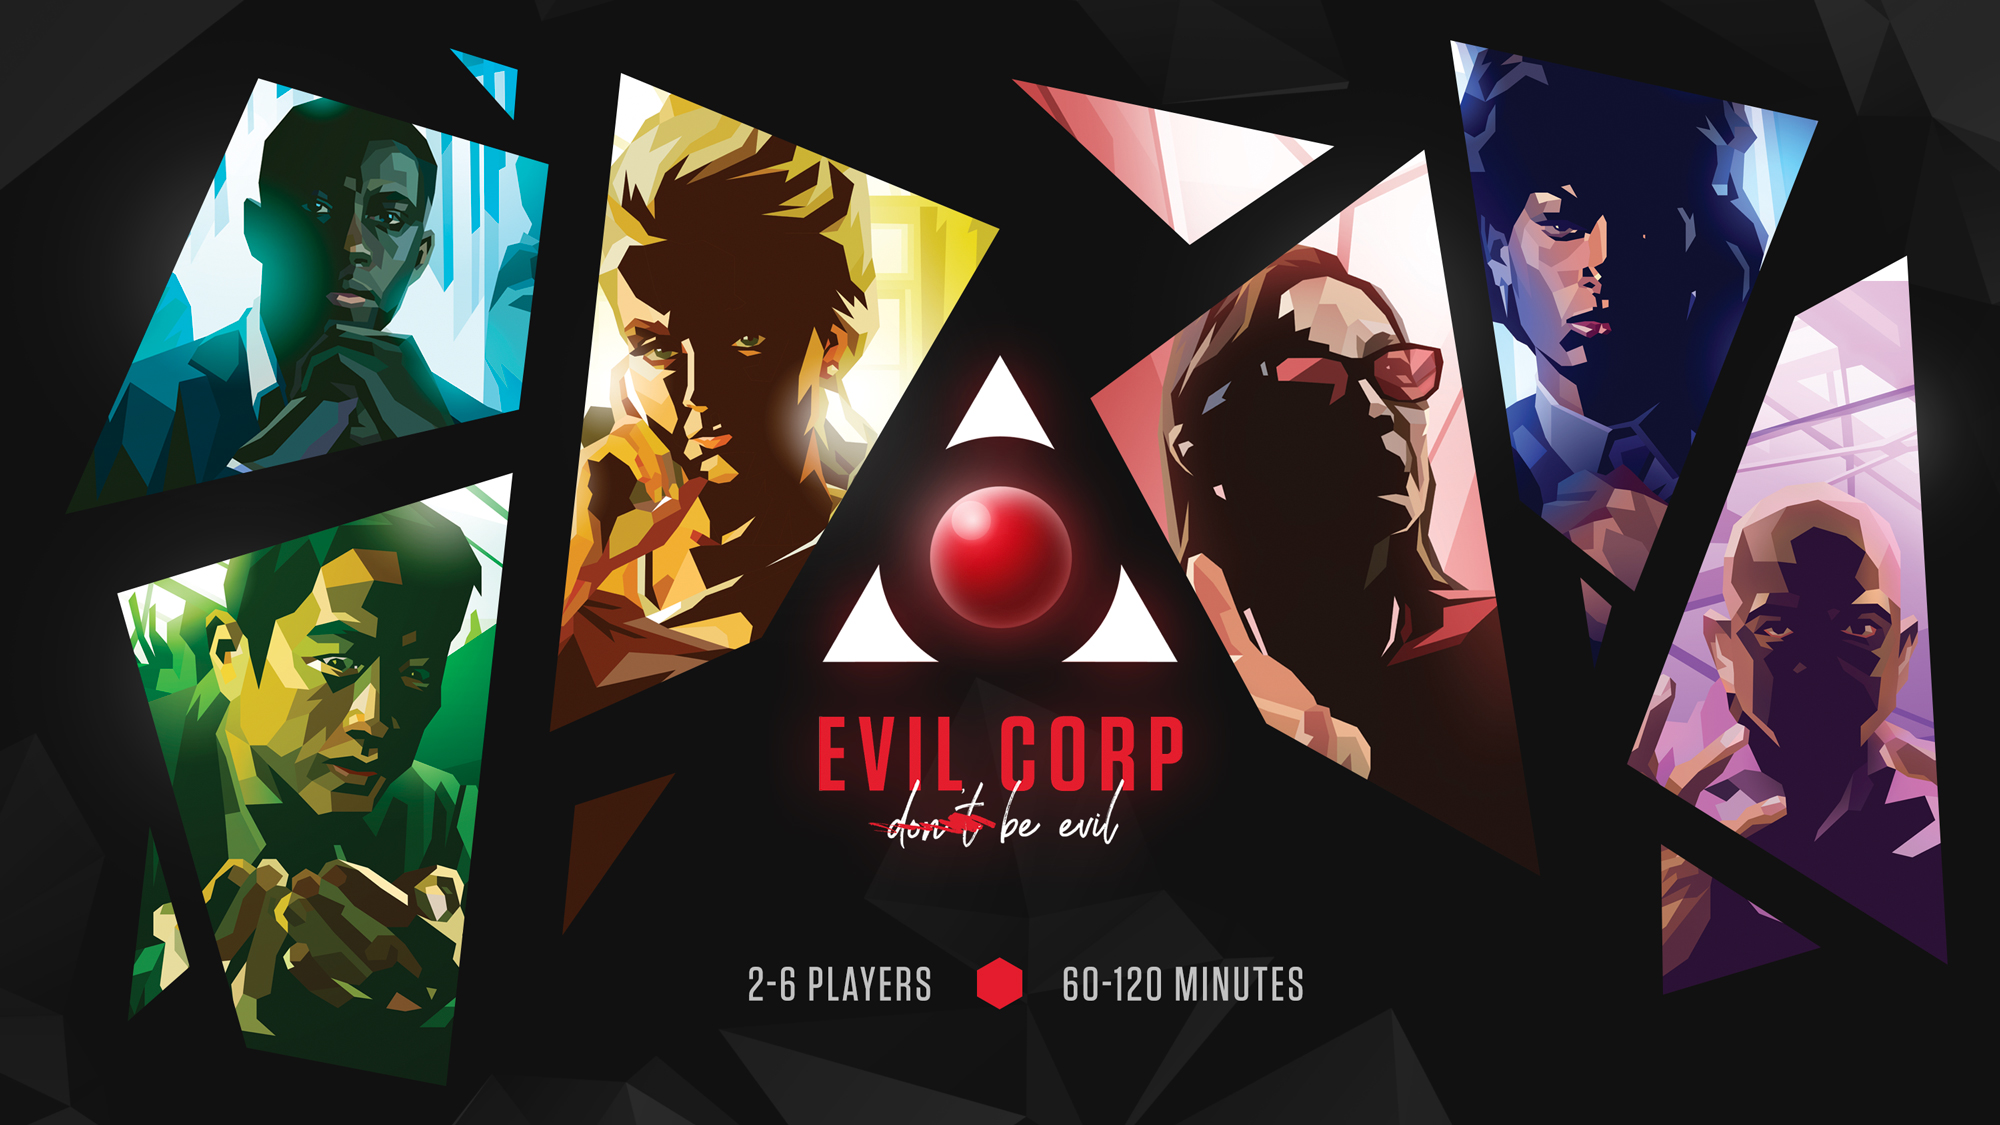 FOR IMMEDIATE RELEASE: EVIL CORP BOARDGAME LAUNCHES AMIDST ...